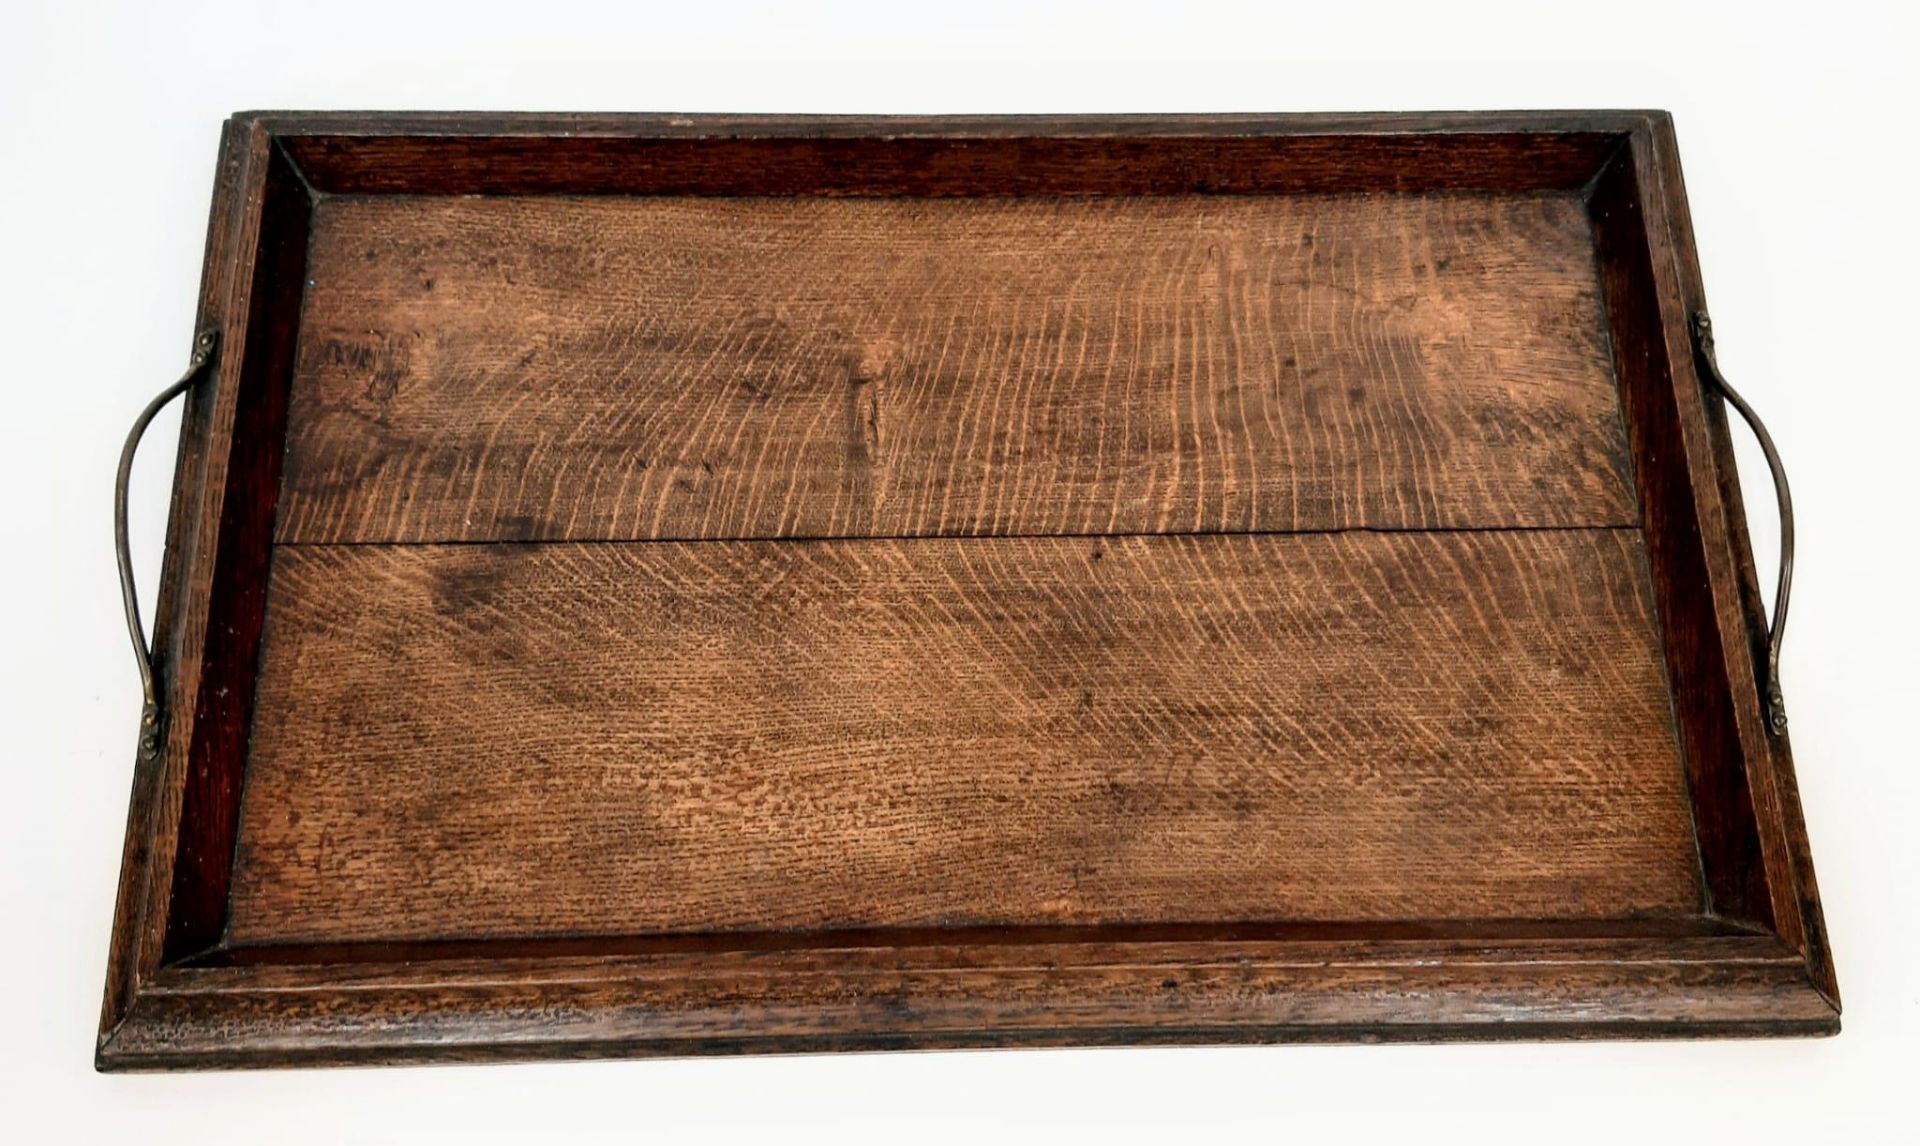 A good honest piece of Victoriana. An antique, solid oak, serving tray with bronze handles.